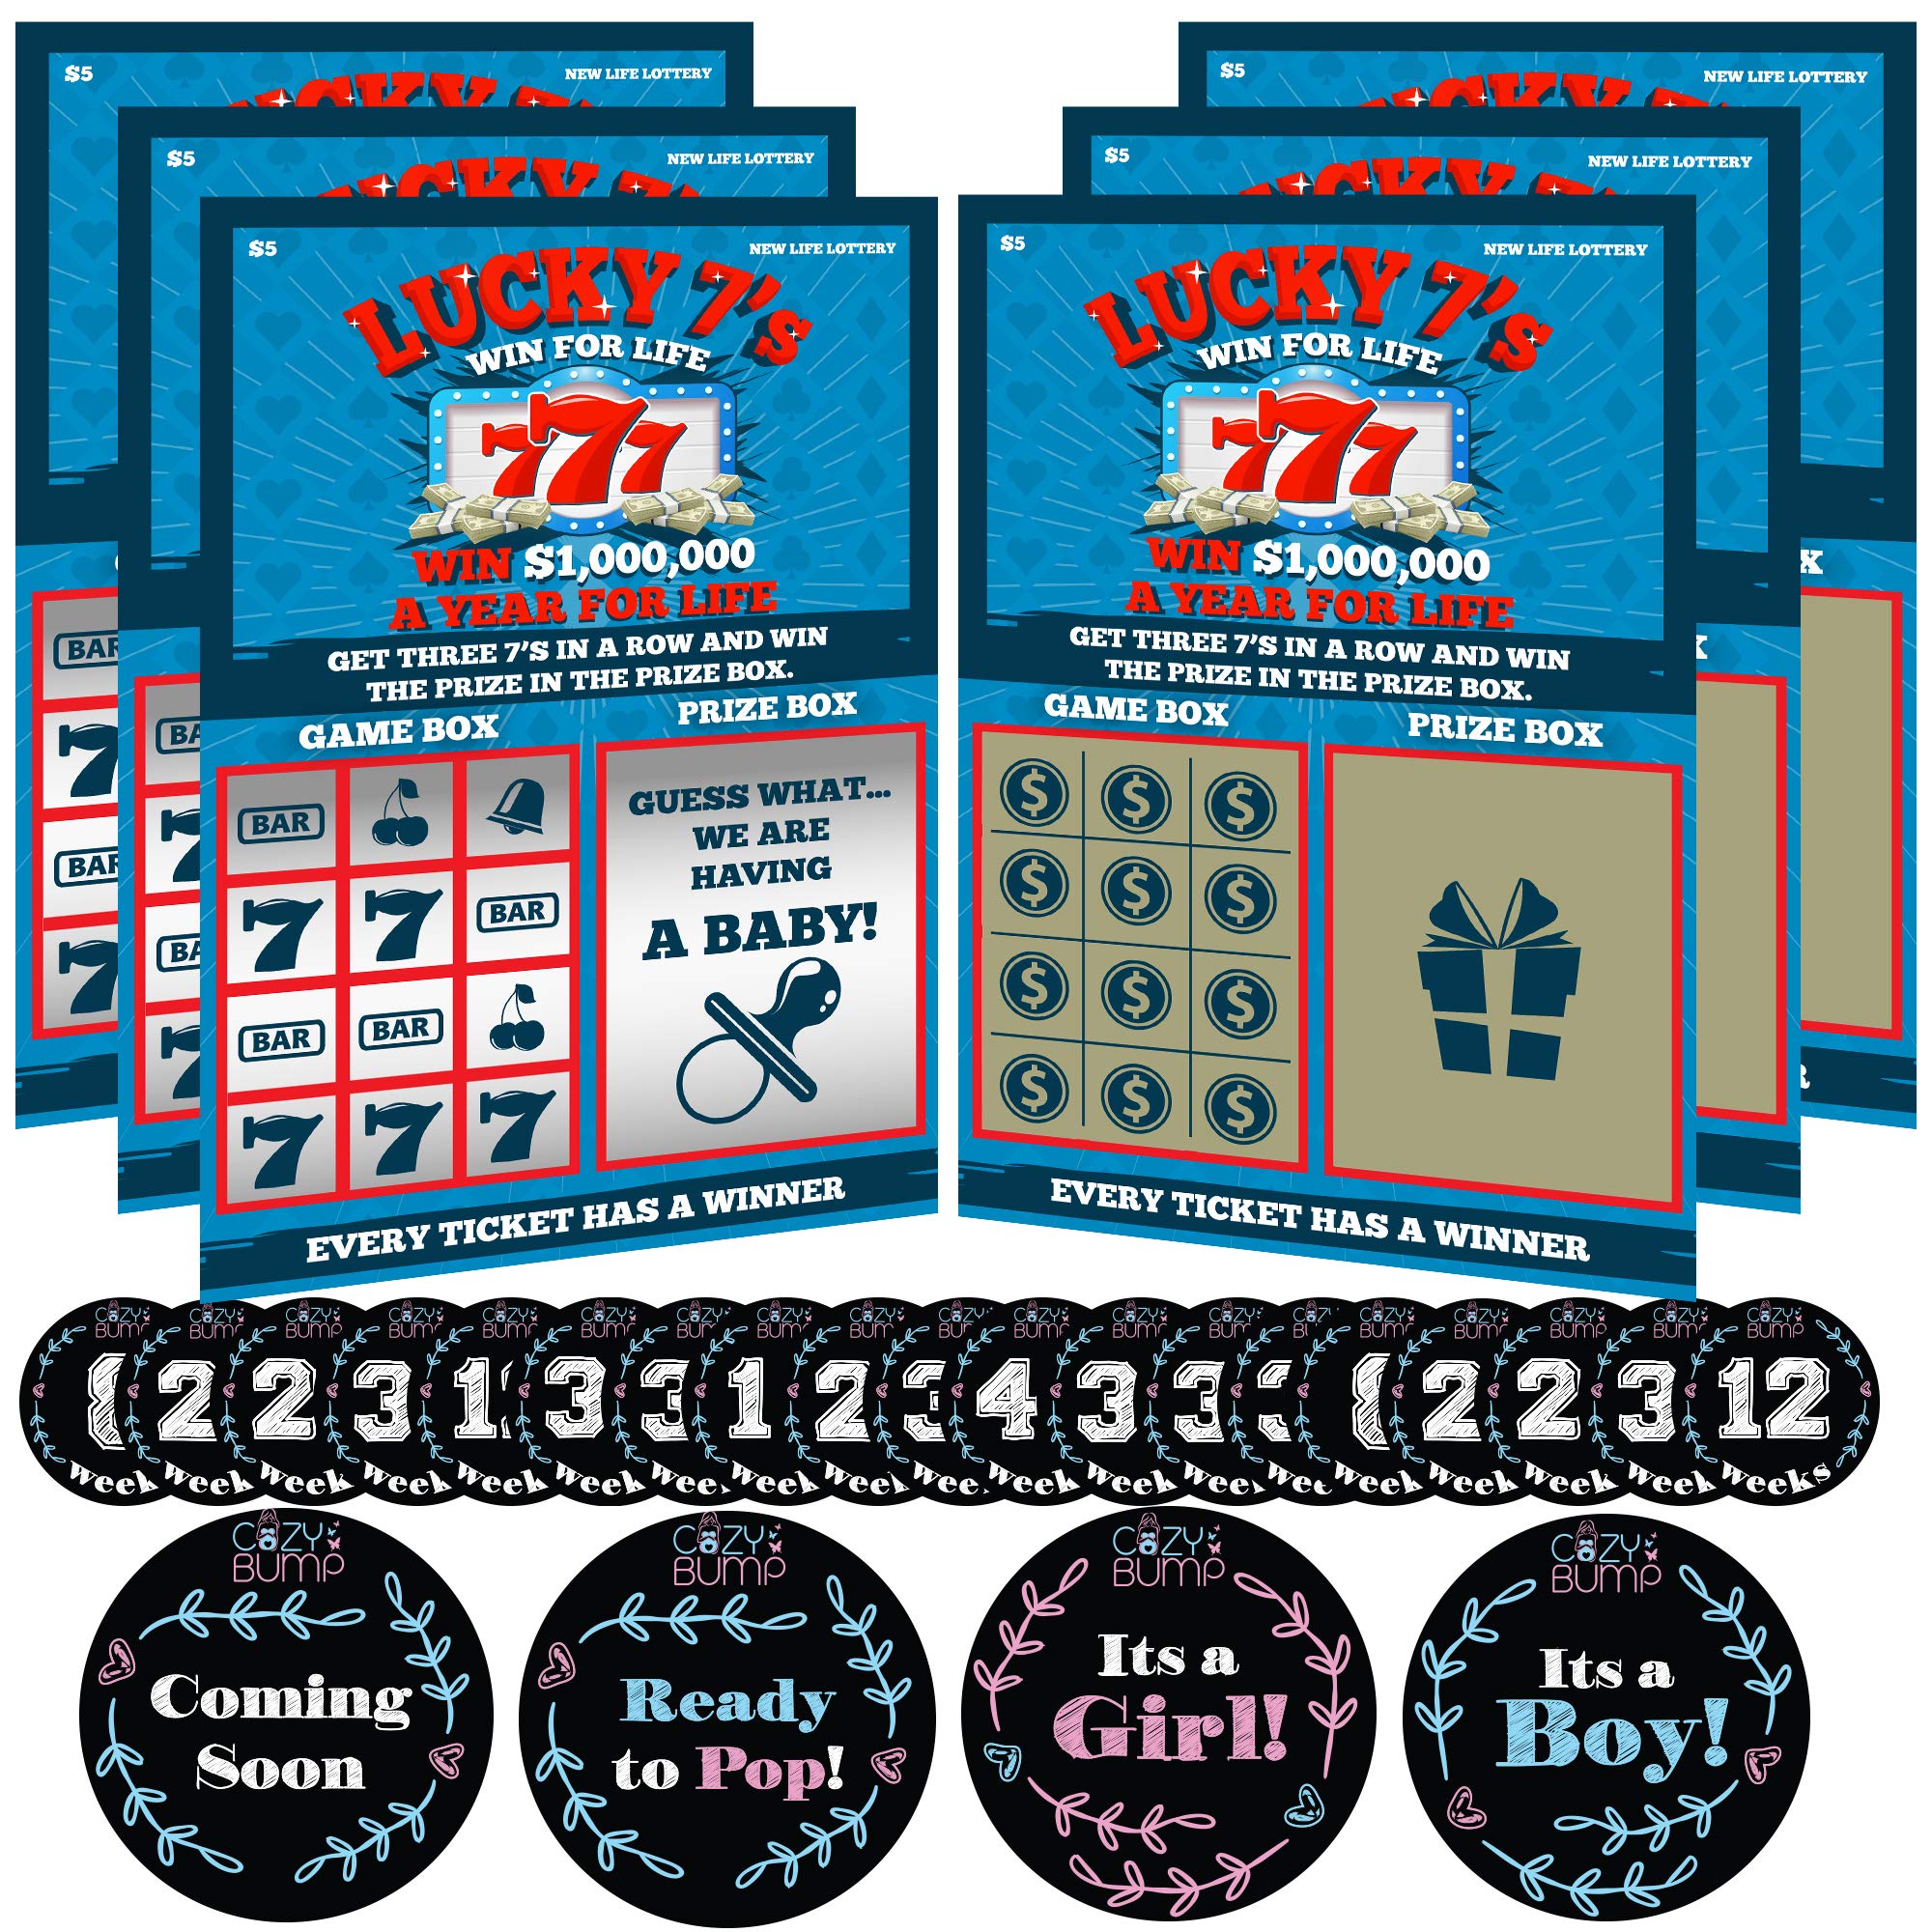 Back & Bump Comfort Pregnancy Announcement Scratch Off Cards for Baby Announcement - 6 Pregnancy Scratch Offs Included - Comes with Pregnancy Stickers